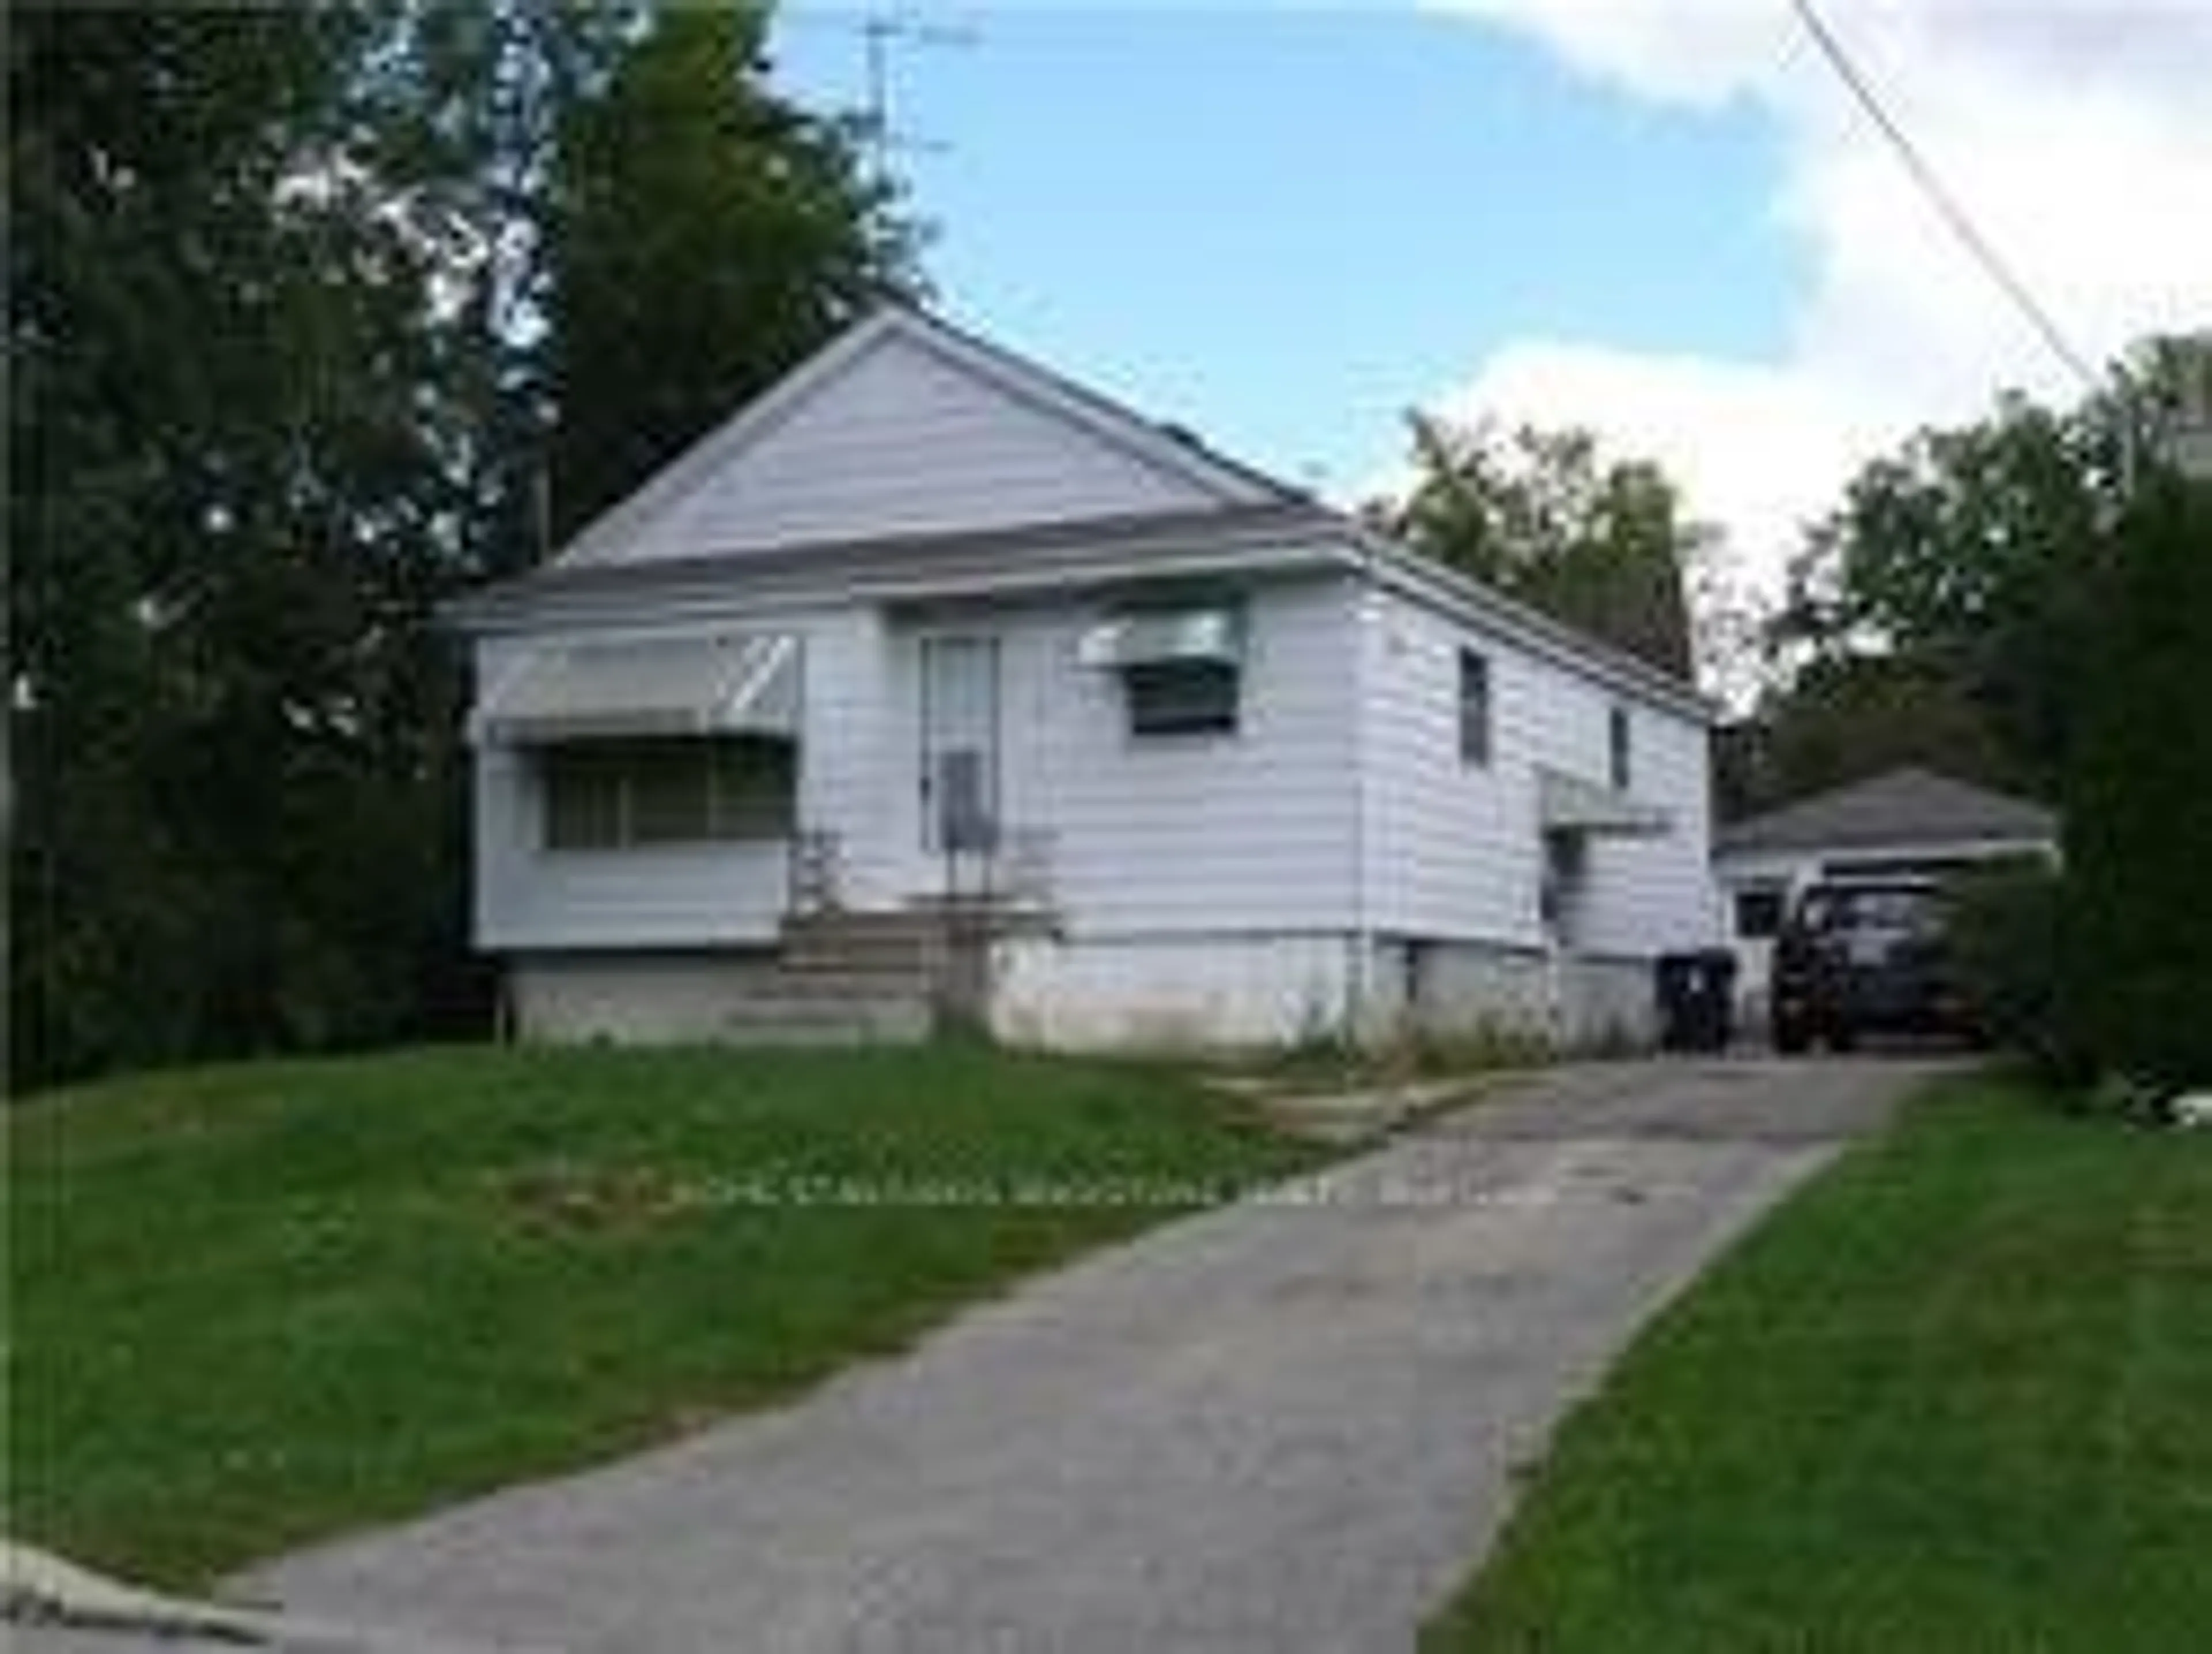 Frontside or backside of a home for 65 Cobden St, Toronto Ontario M2R 1S4